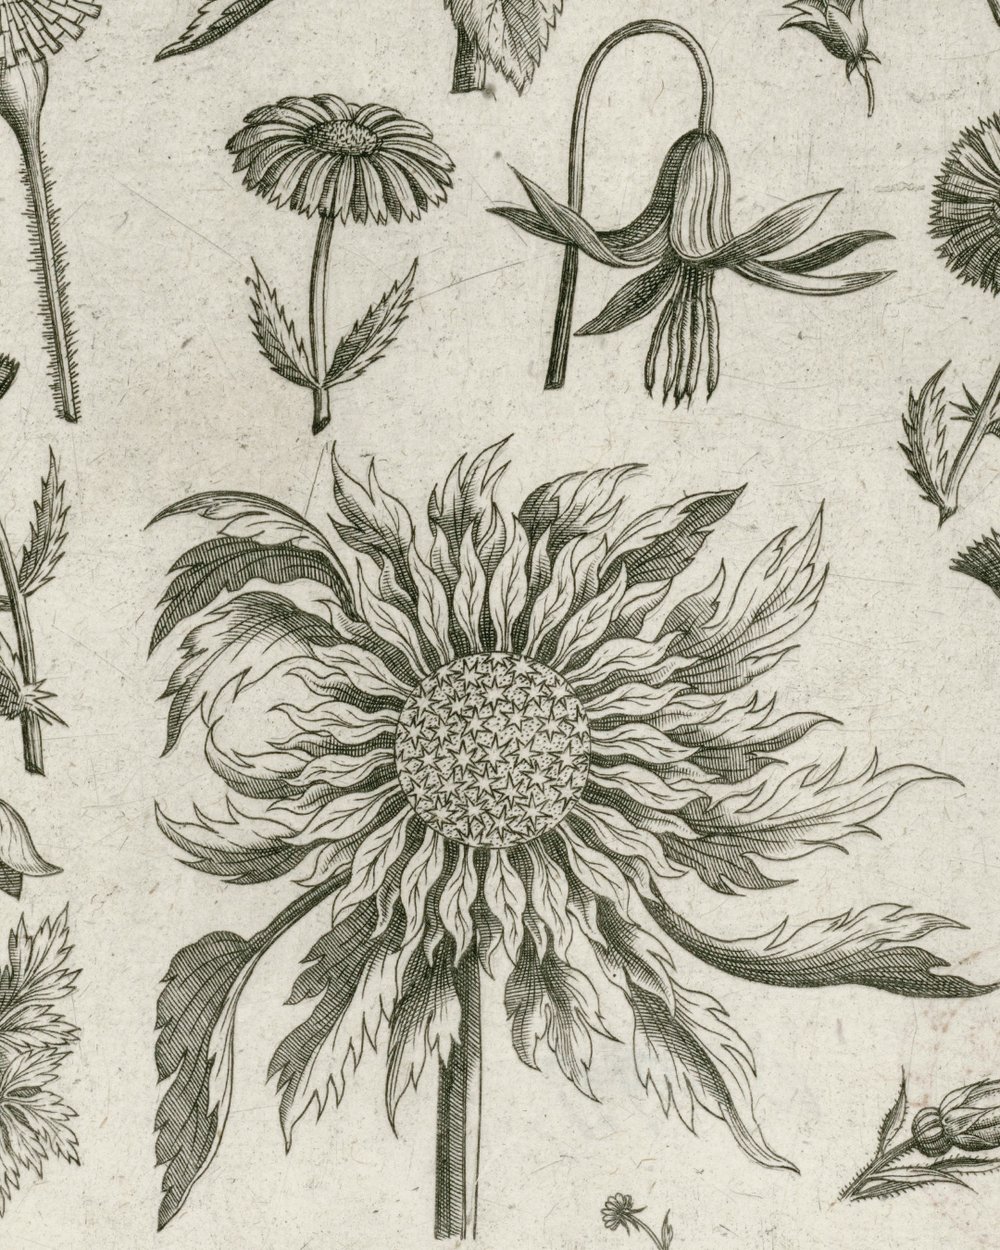 ''Sunflower and other flowers'' (1570 - 1618)